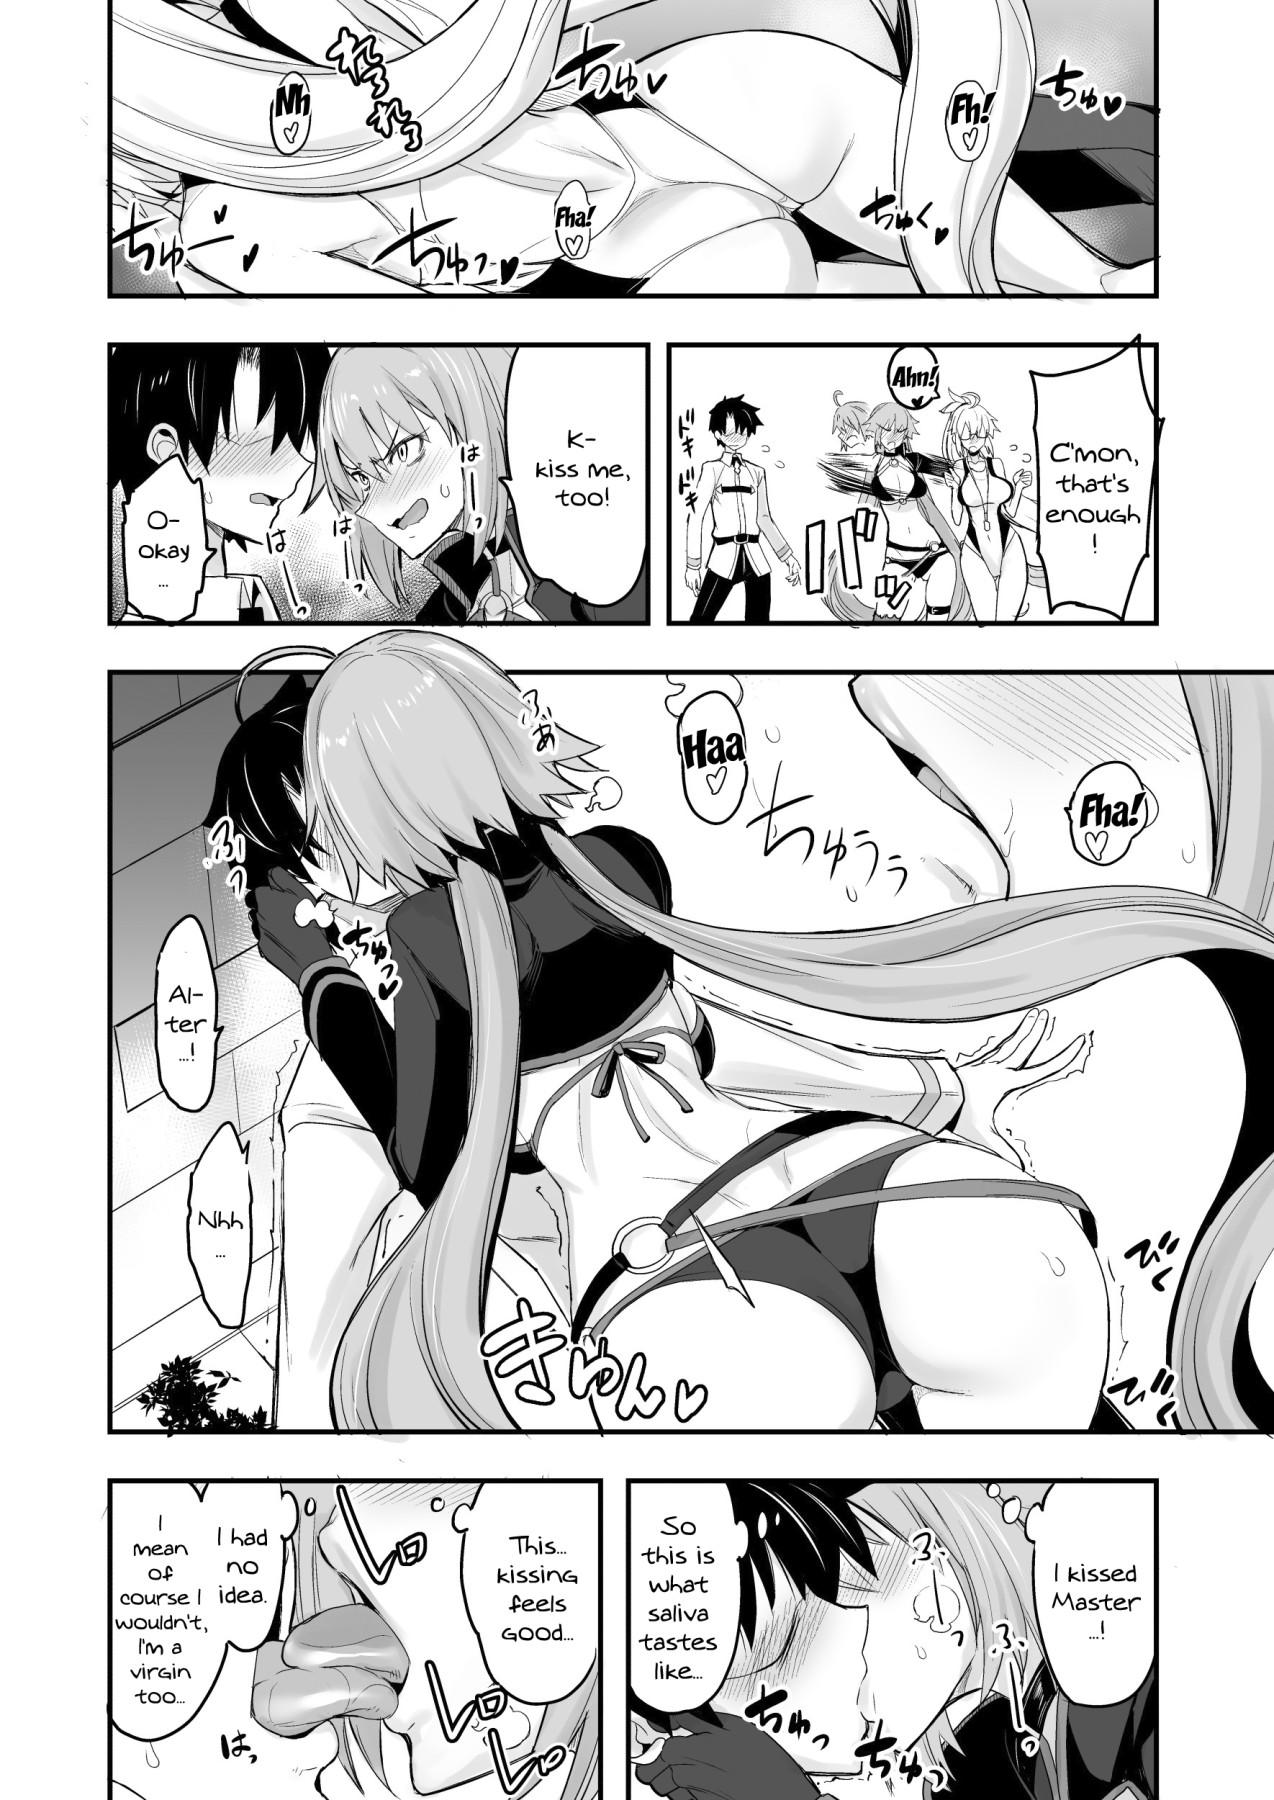 Longhair w jeanne vs master - Fate grand order Flash - Page 5